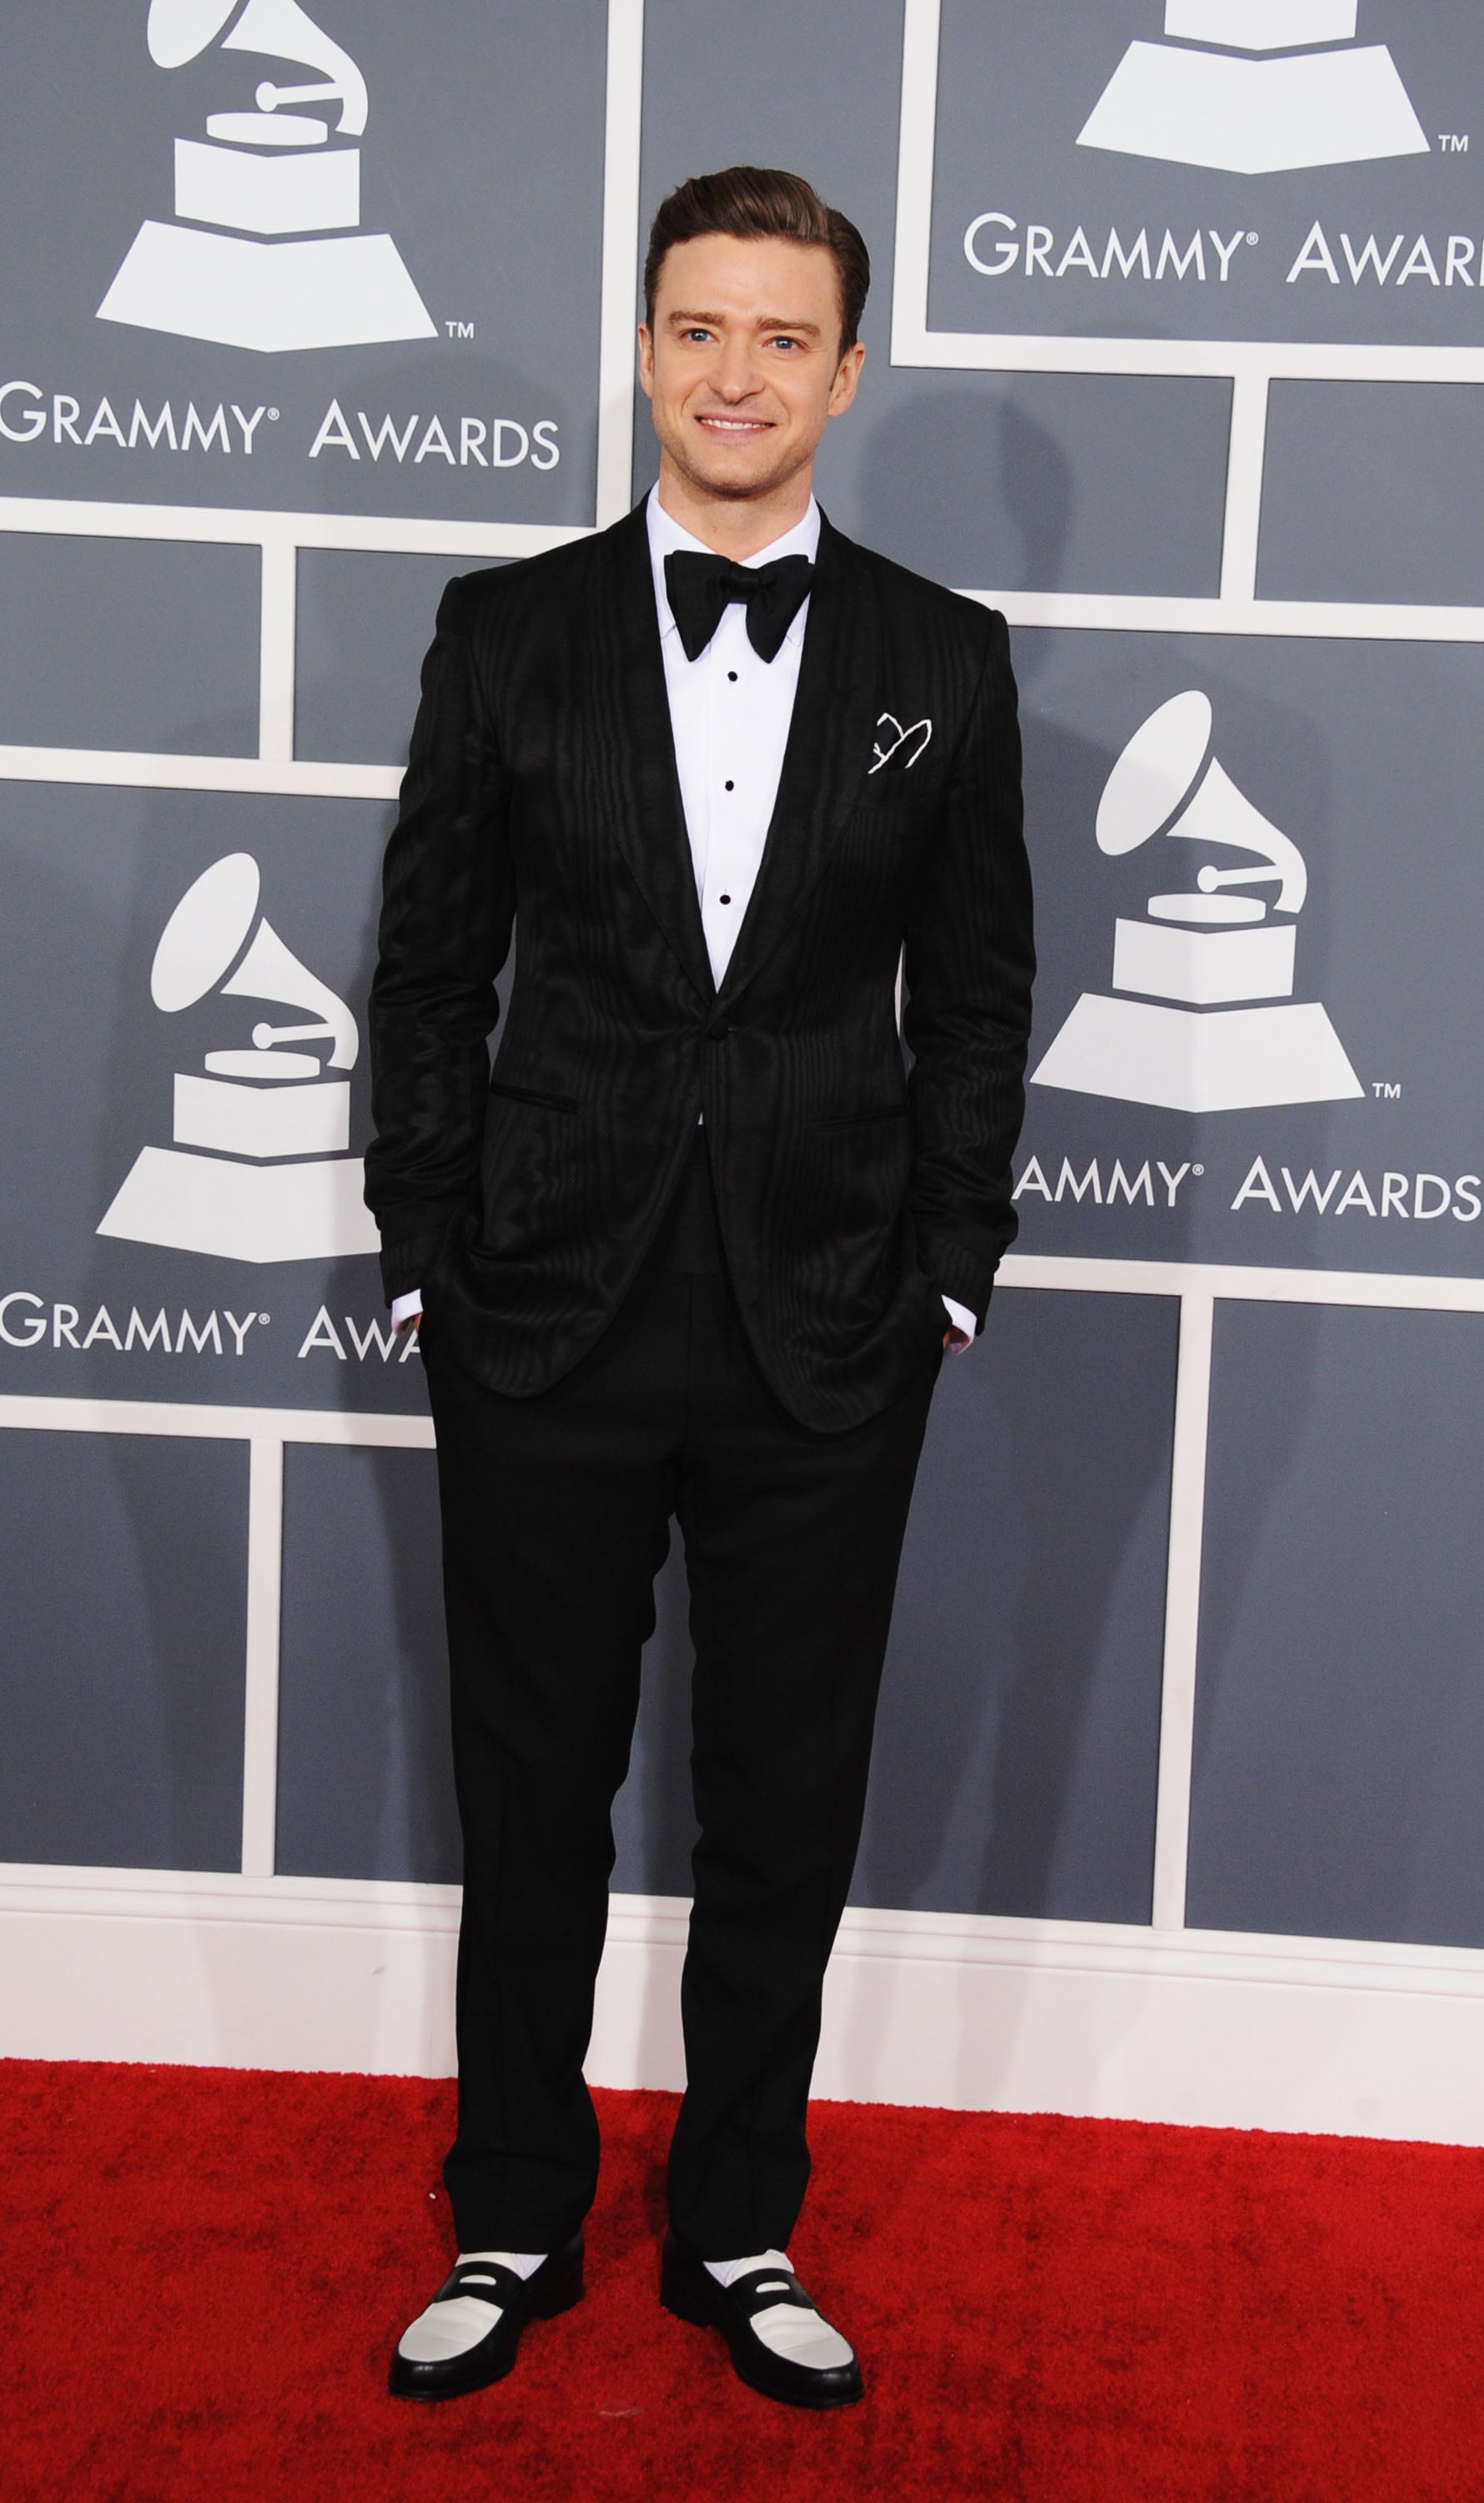 Justin Timberlake looked dapper in a tuxedo for the Grammy Awards